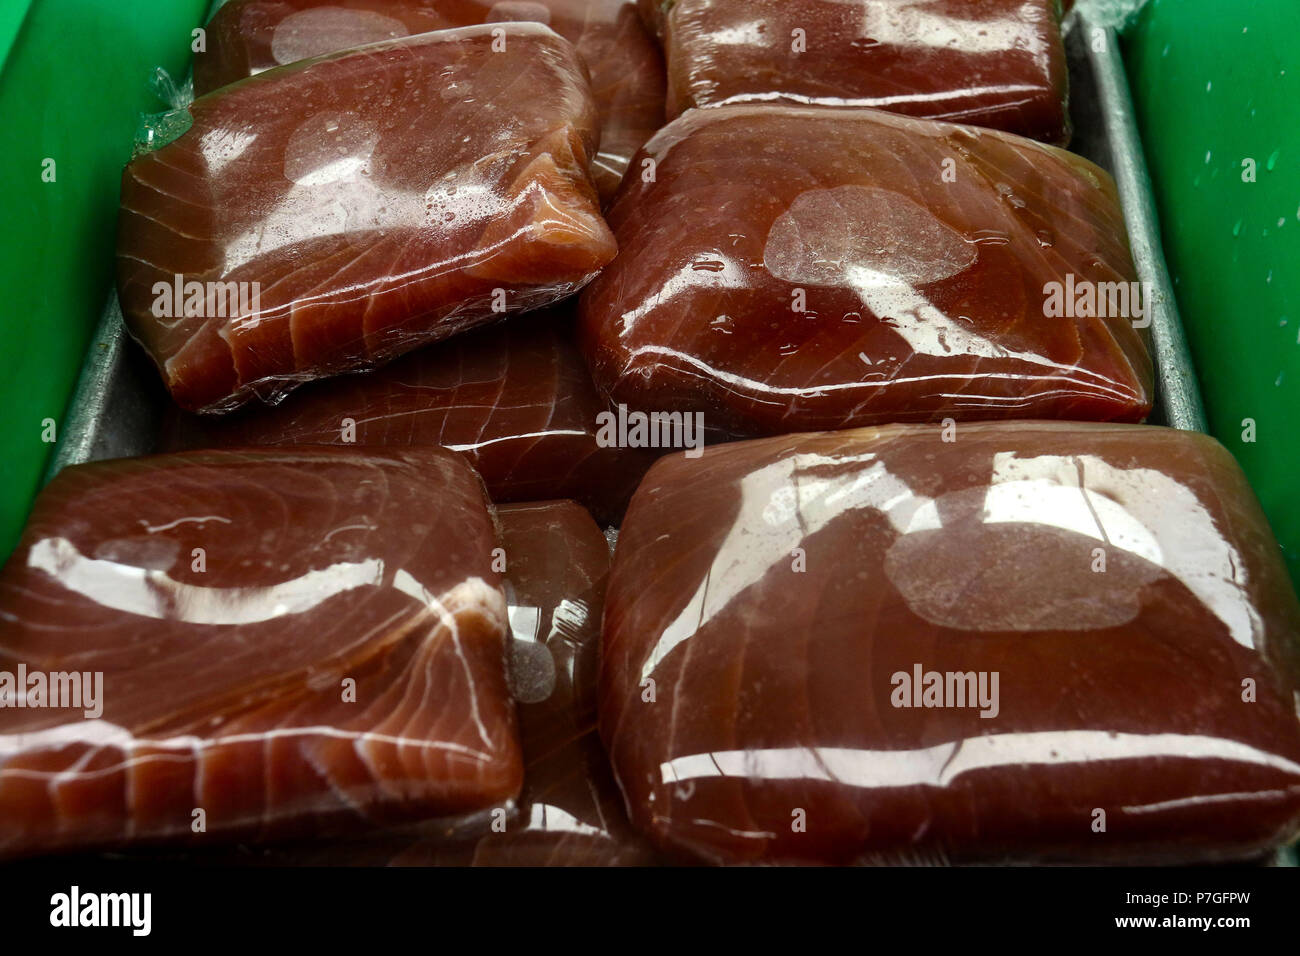 Tuna wrapped in cellophane at fish market Stock Photo